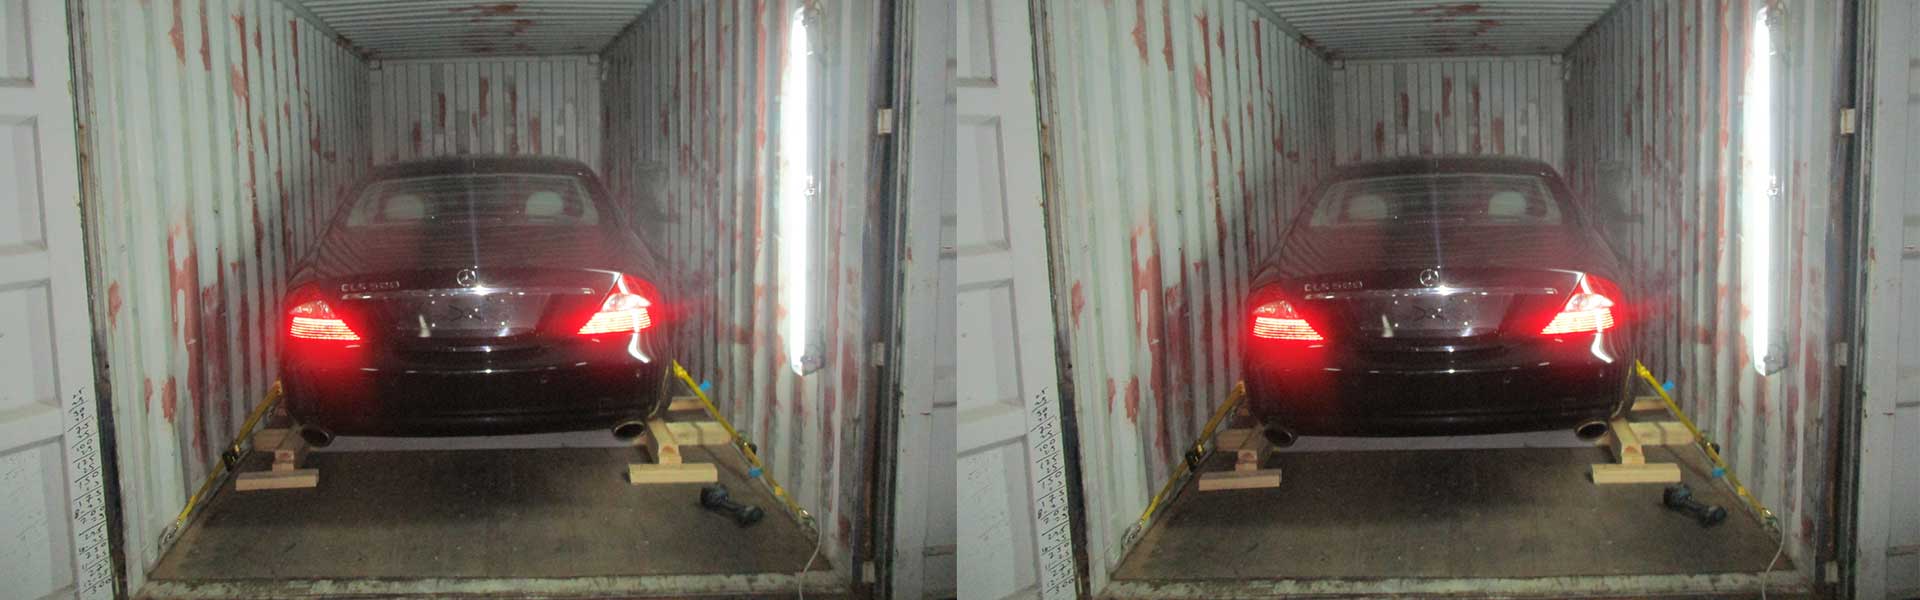 Container Loading and Unloading - vehicles unloading